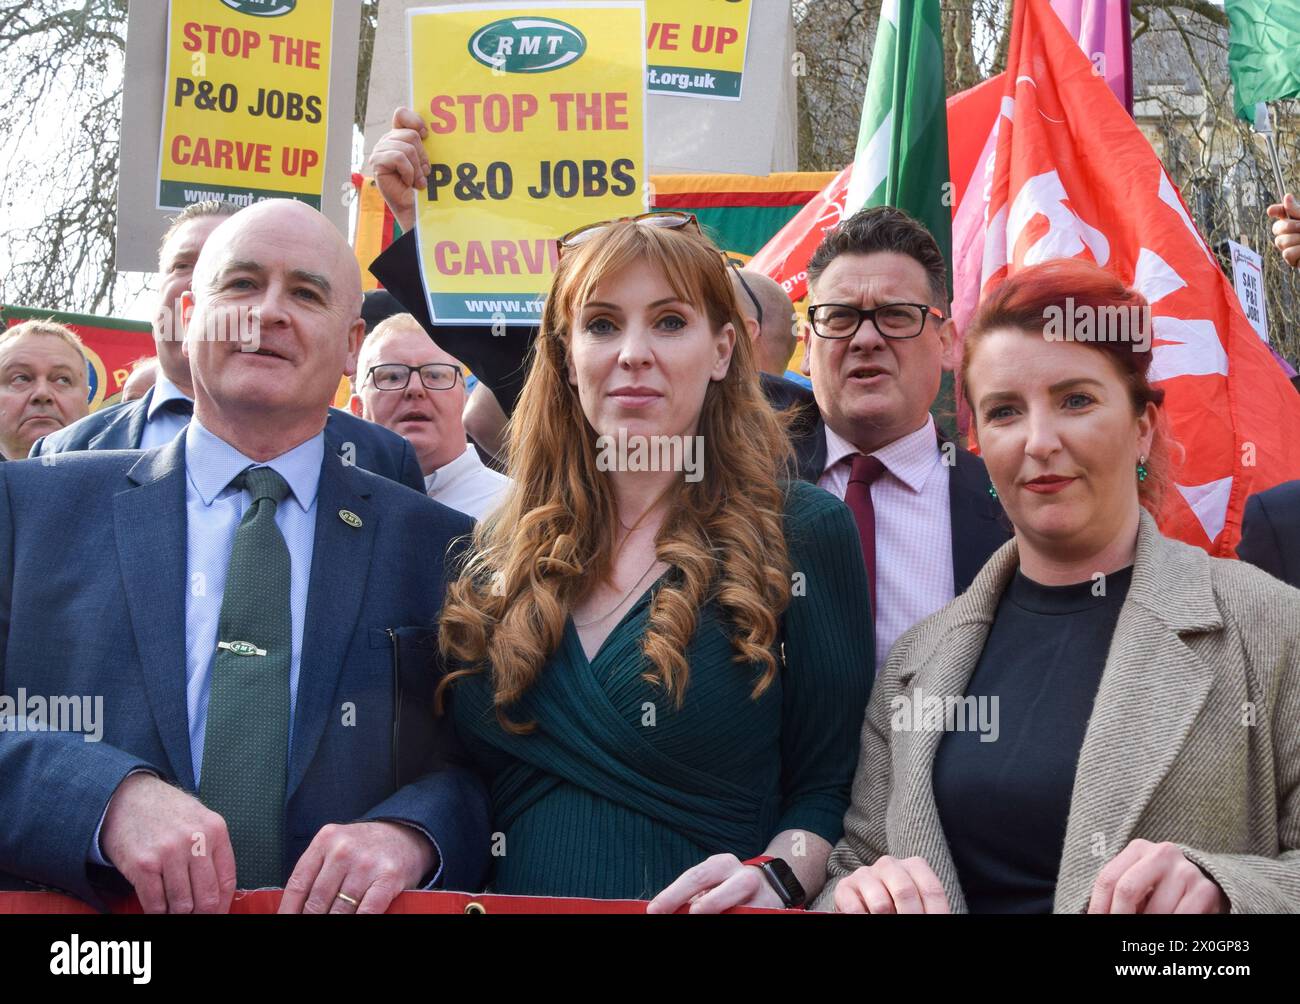 London, UK. 21st March 2022. Labour deputy leader Angela Rayner, Shadow Secretary of State for Transport and Labour MP Louise Haigh, and secretary general of RMT Mick Lynch join the protesters outside Parliament. P&O Ferries staff and RMT Union members marched from the headquarters of DP World, the company which owns P&O, to Parliament, after 800 UK staff were fired and replaced by agency workers. Credit: Vuk Valcic / Alamy Stock Photo